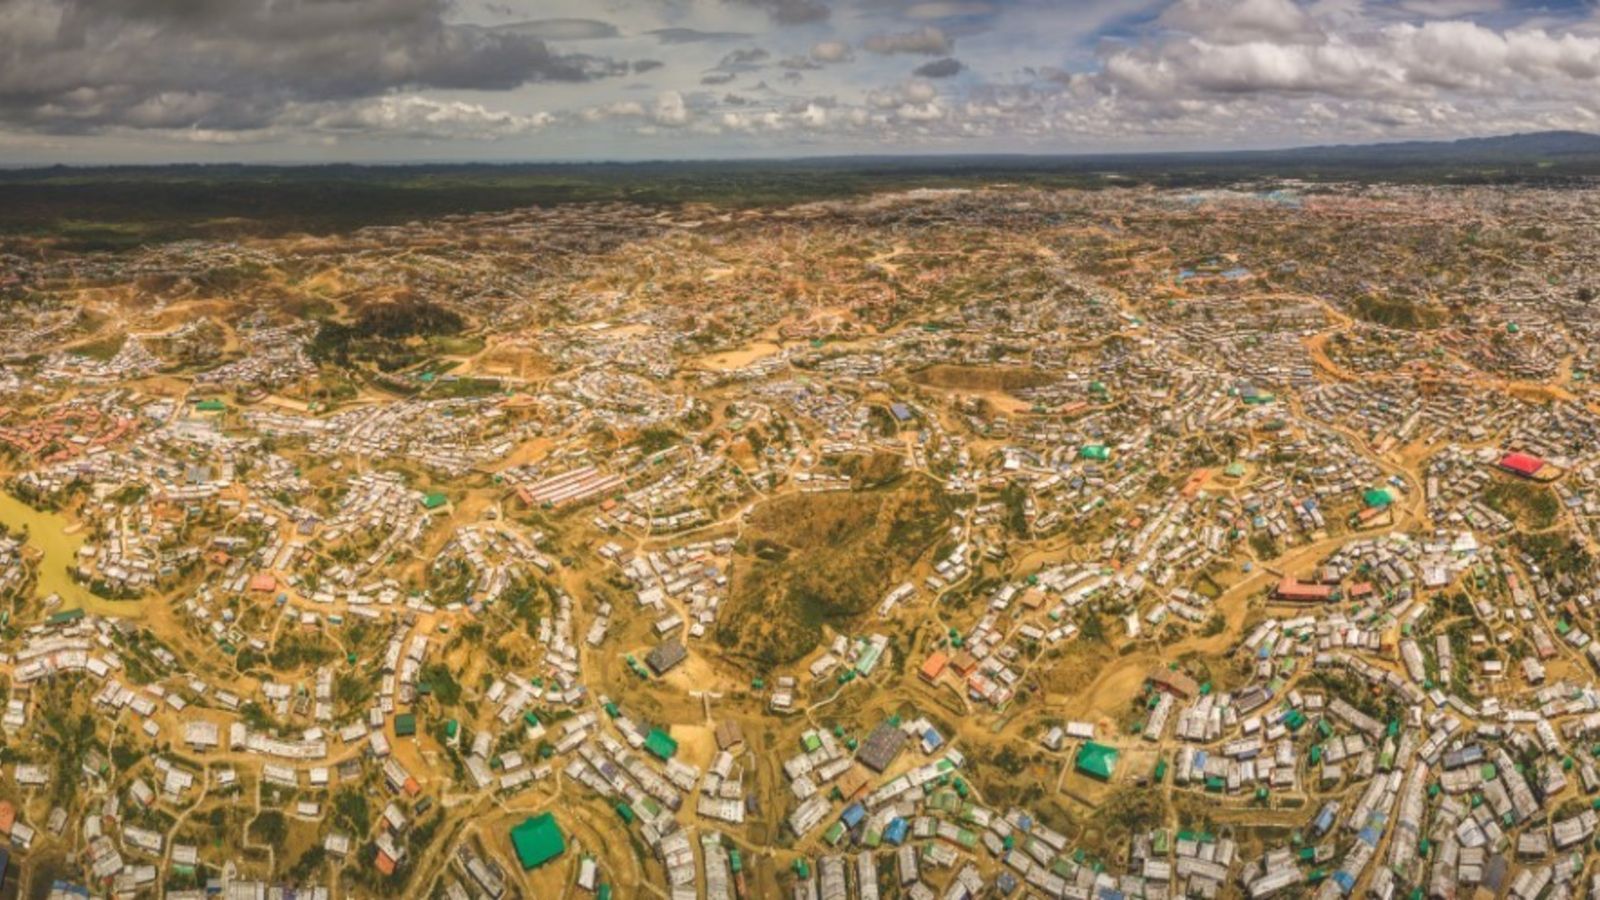 Refugee settlement viewed from above